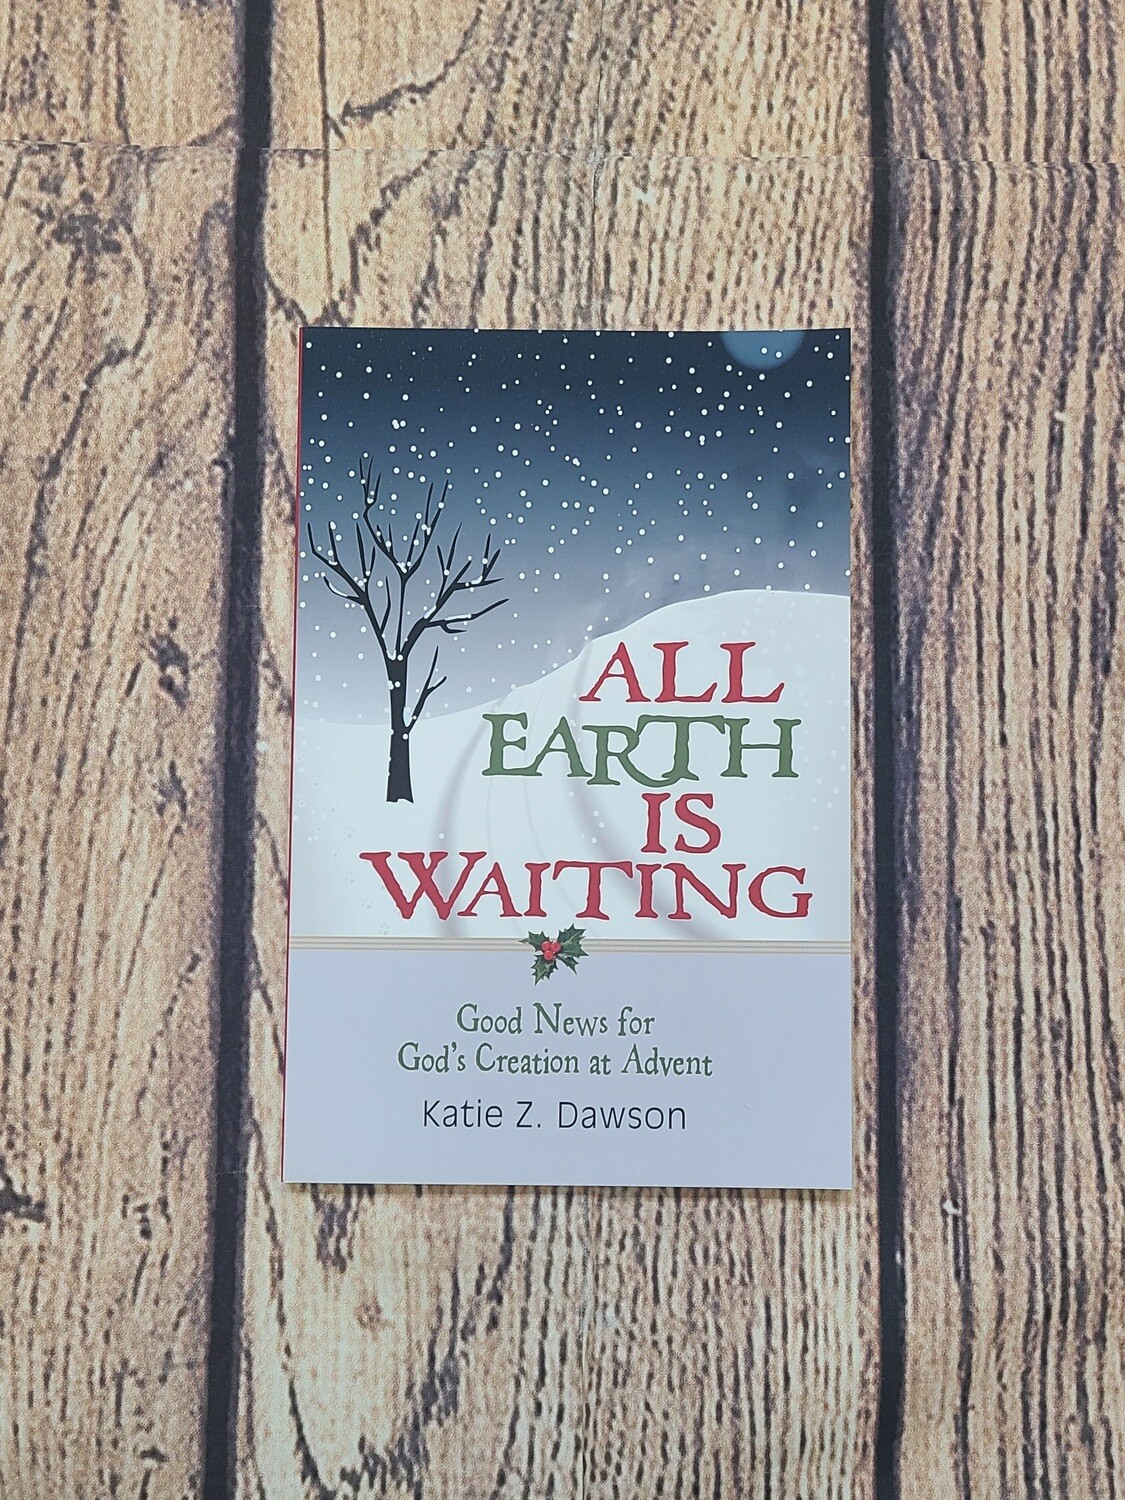 All Earth is Waiting by Katie Z. Dawson